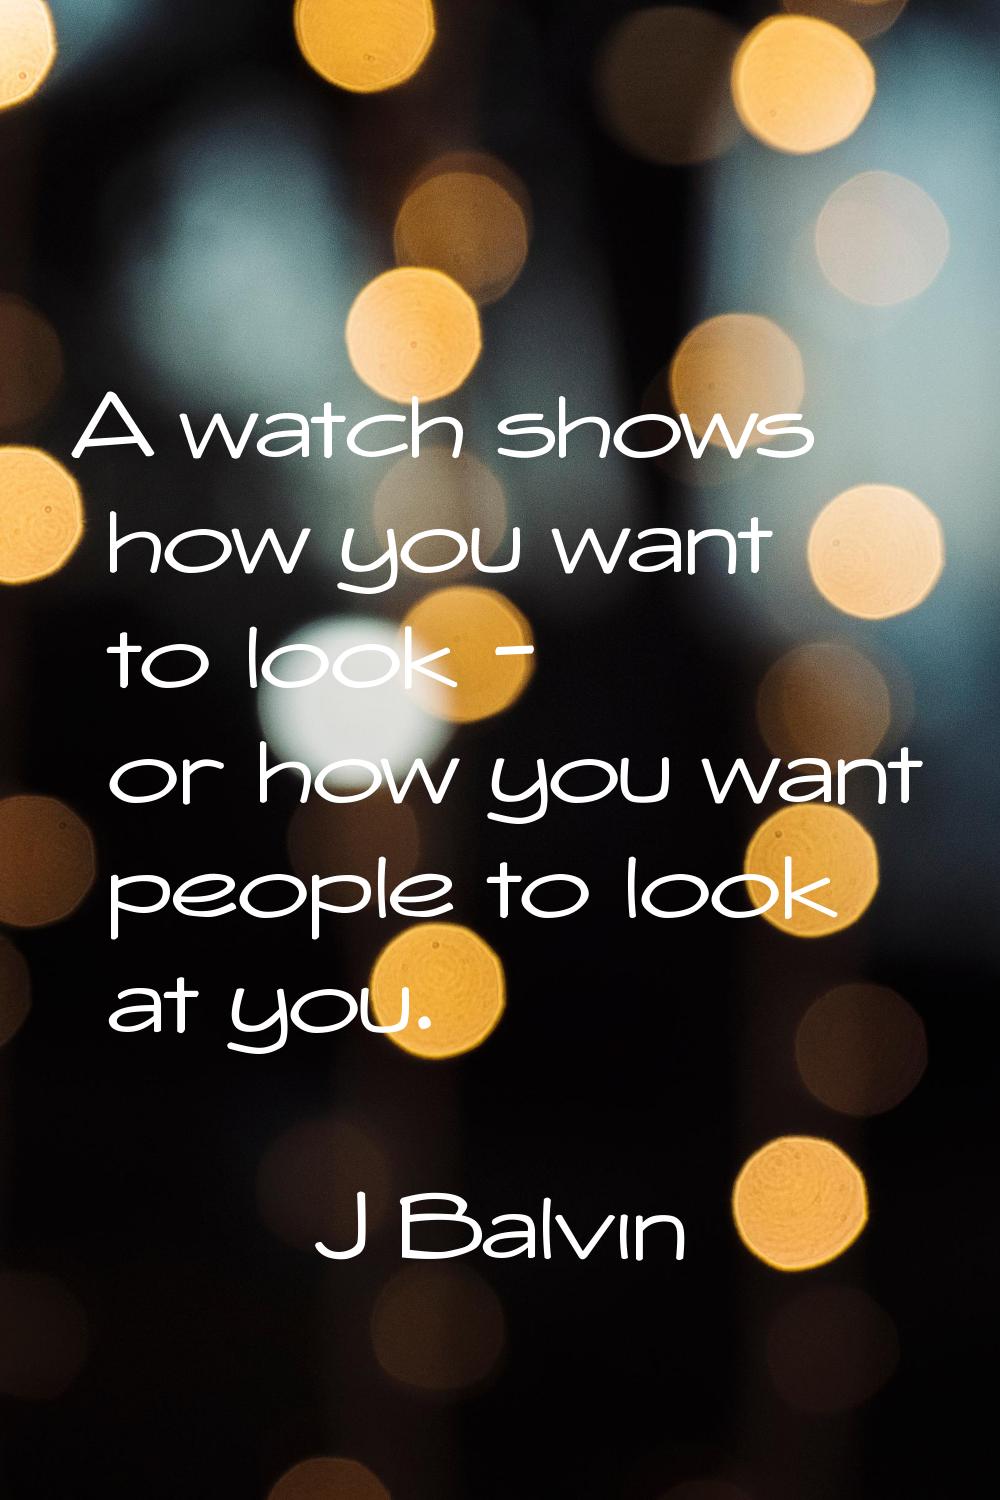 A watch shows how you want to look - or how you want people to look at you.